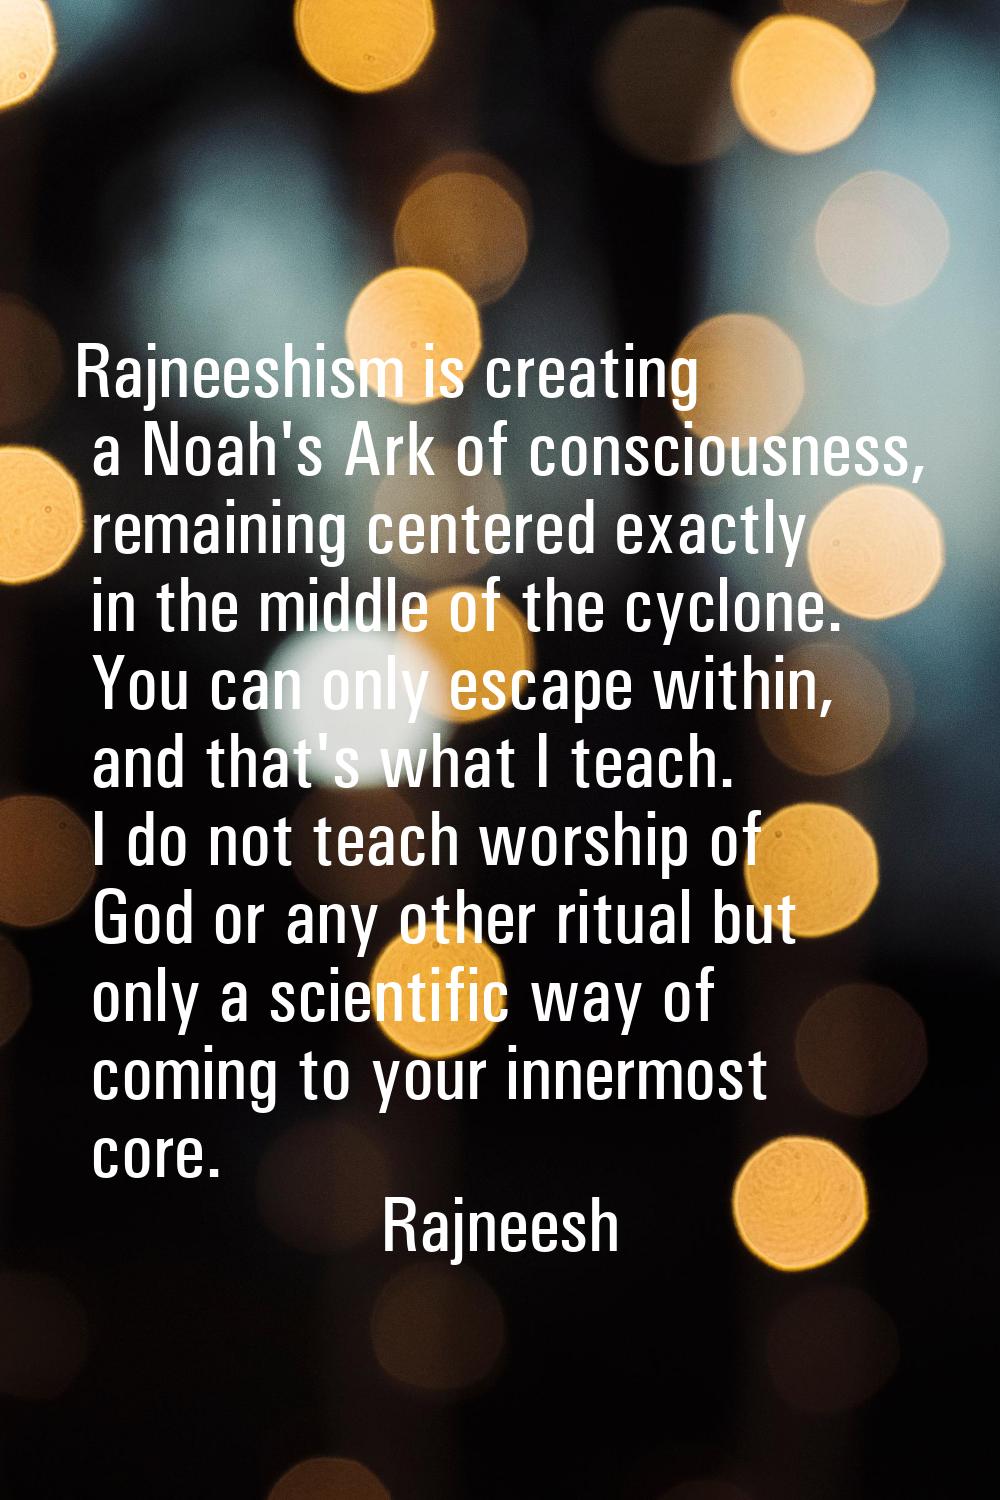 Rajneeshism is creating a Noah's Ark of consciousness, remaining centered exactly in the middle of 